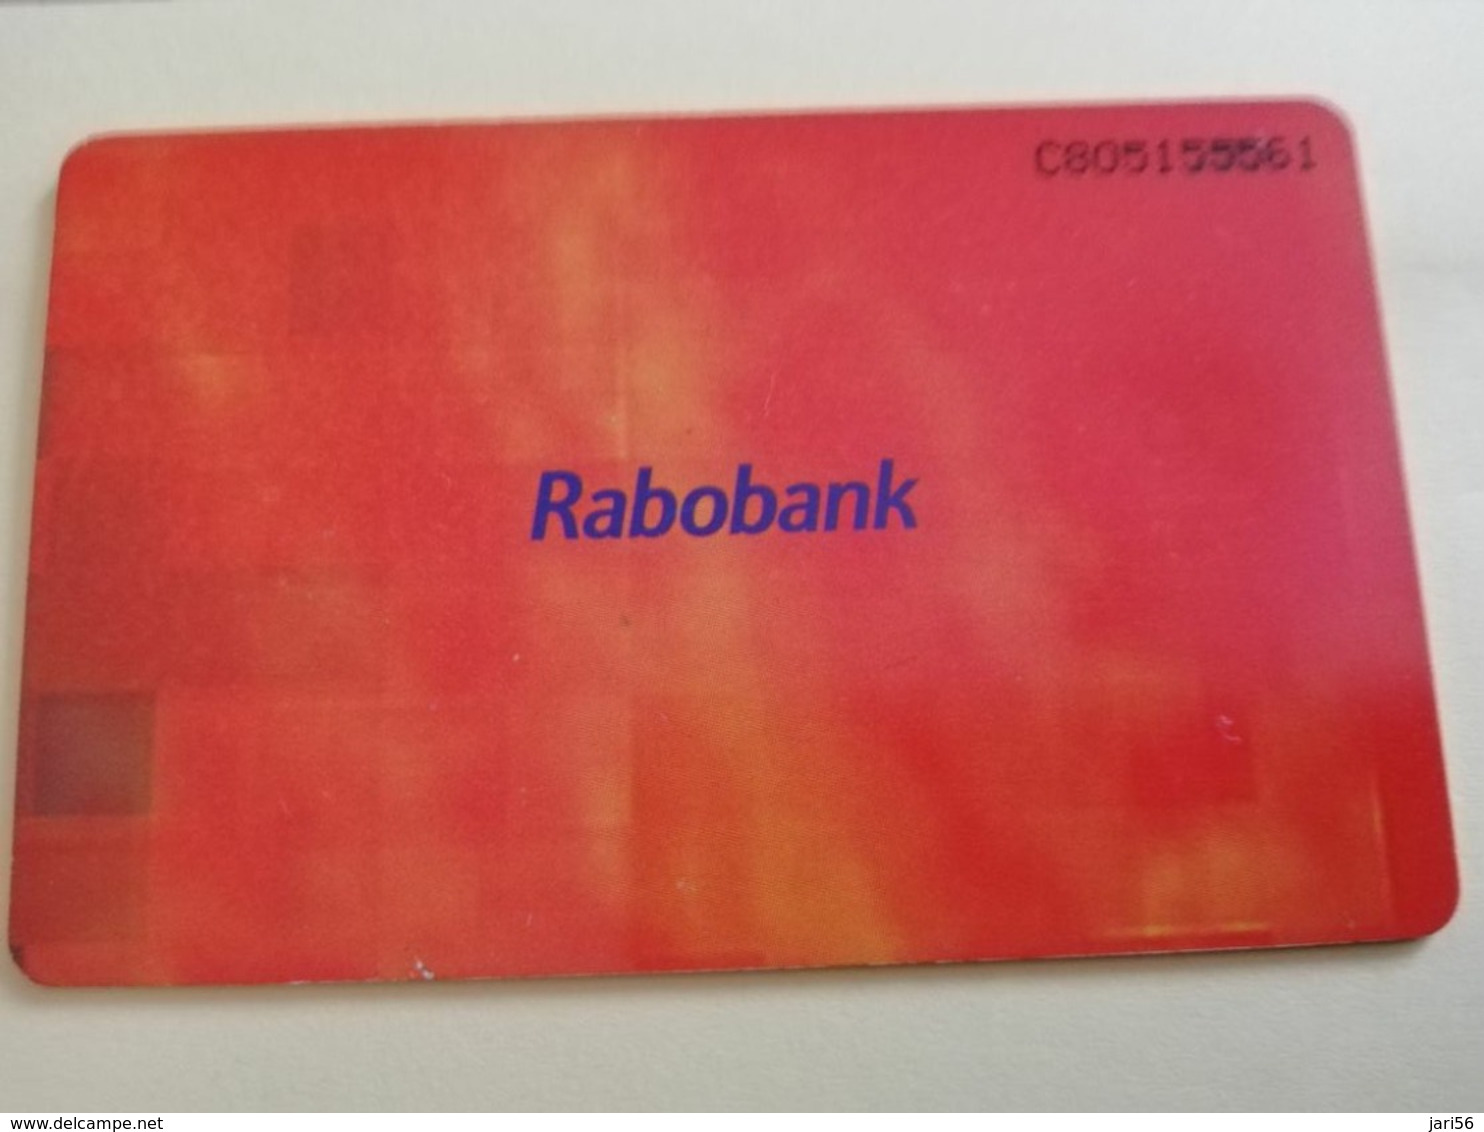 NETHERLANDS  ADVERTISING CHIPCARD HFL 2,50 CRD 132.04 RABOBANK    Fine Used   ** 3169** - Privat